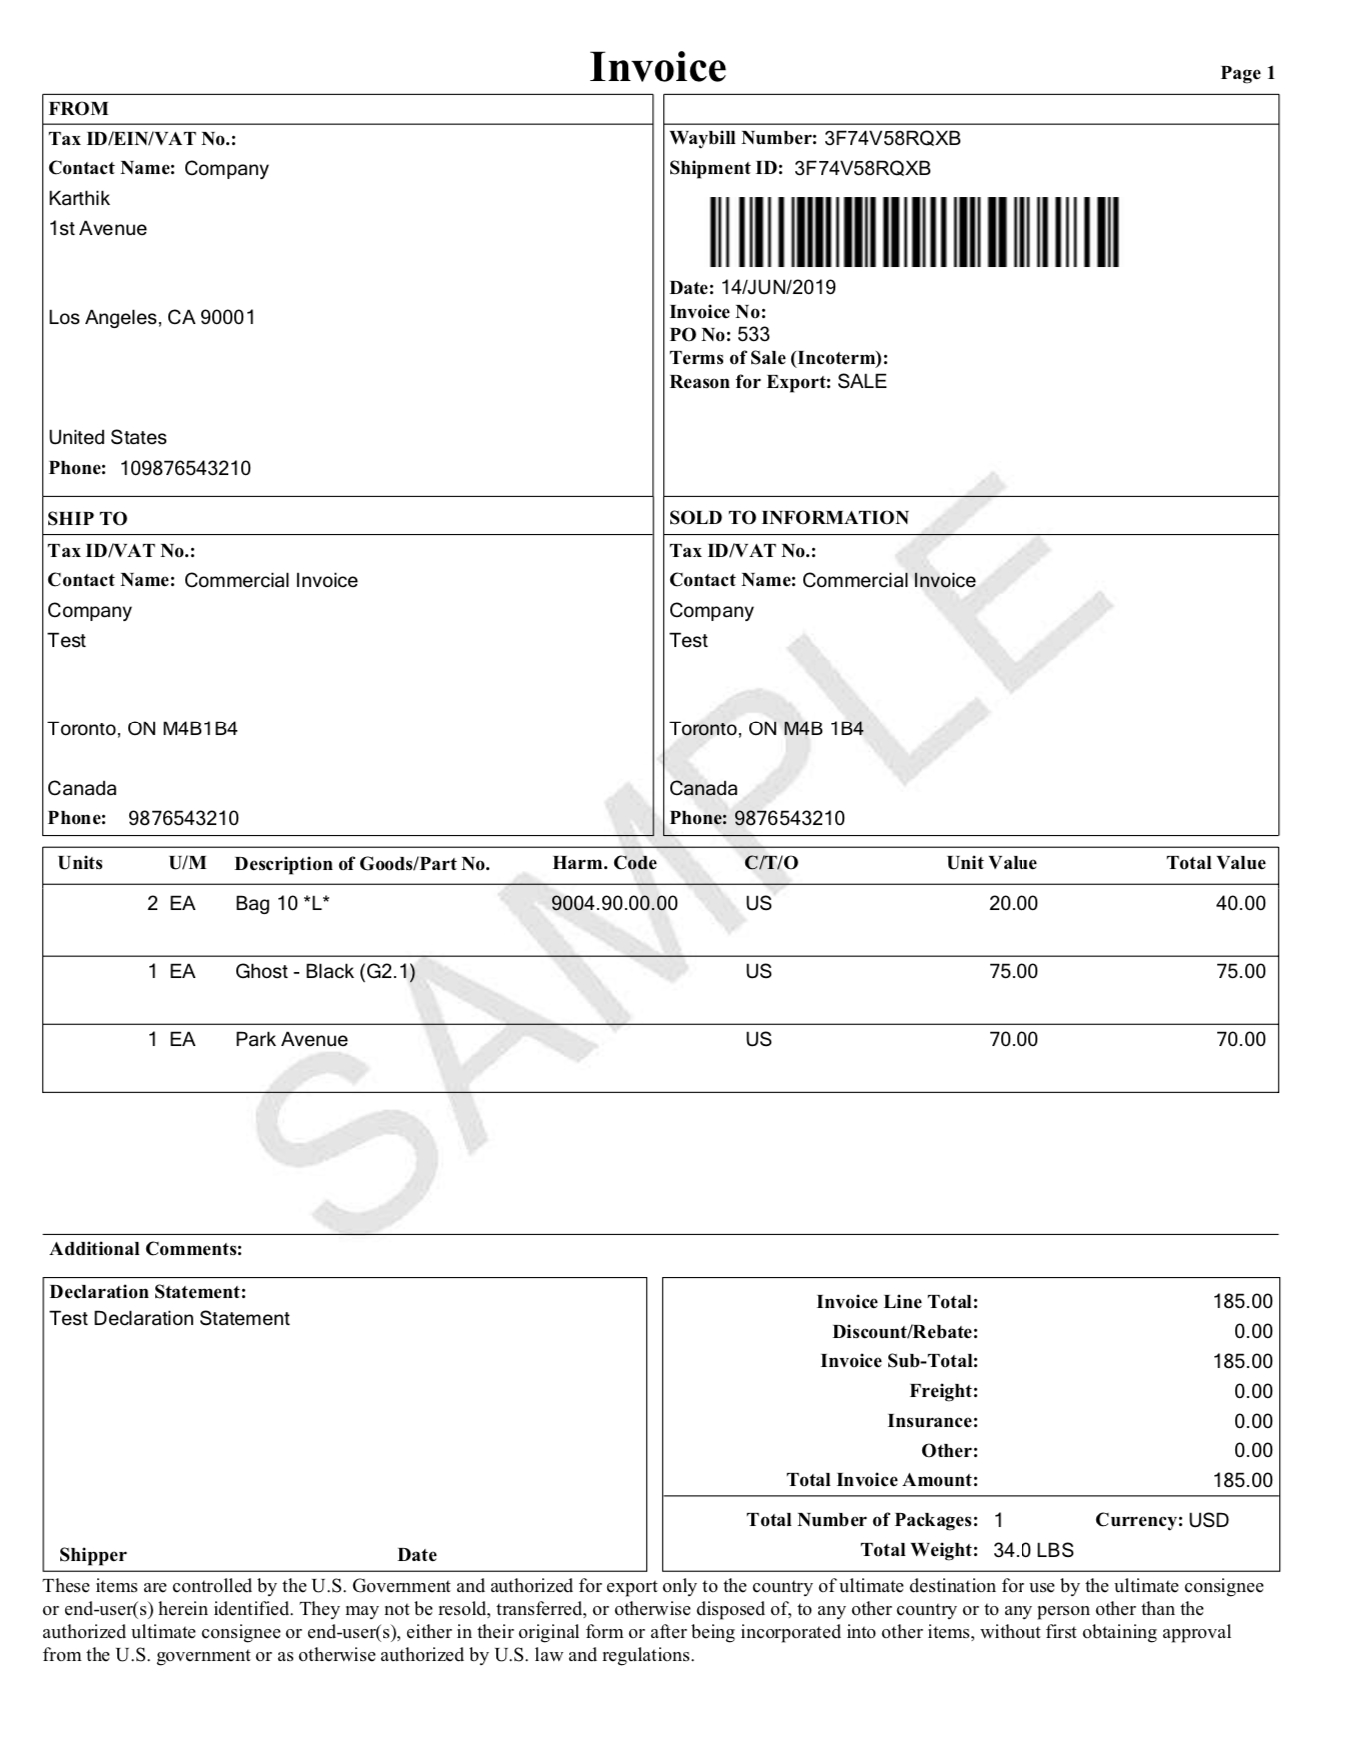 commercial invoice ups template